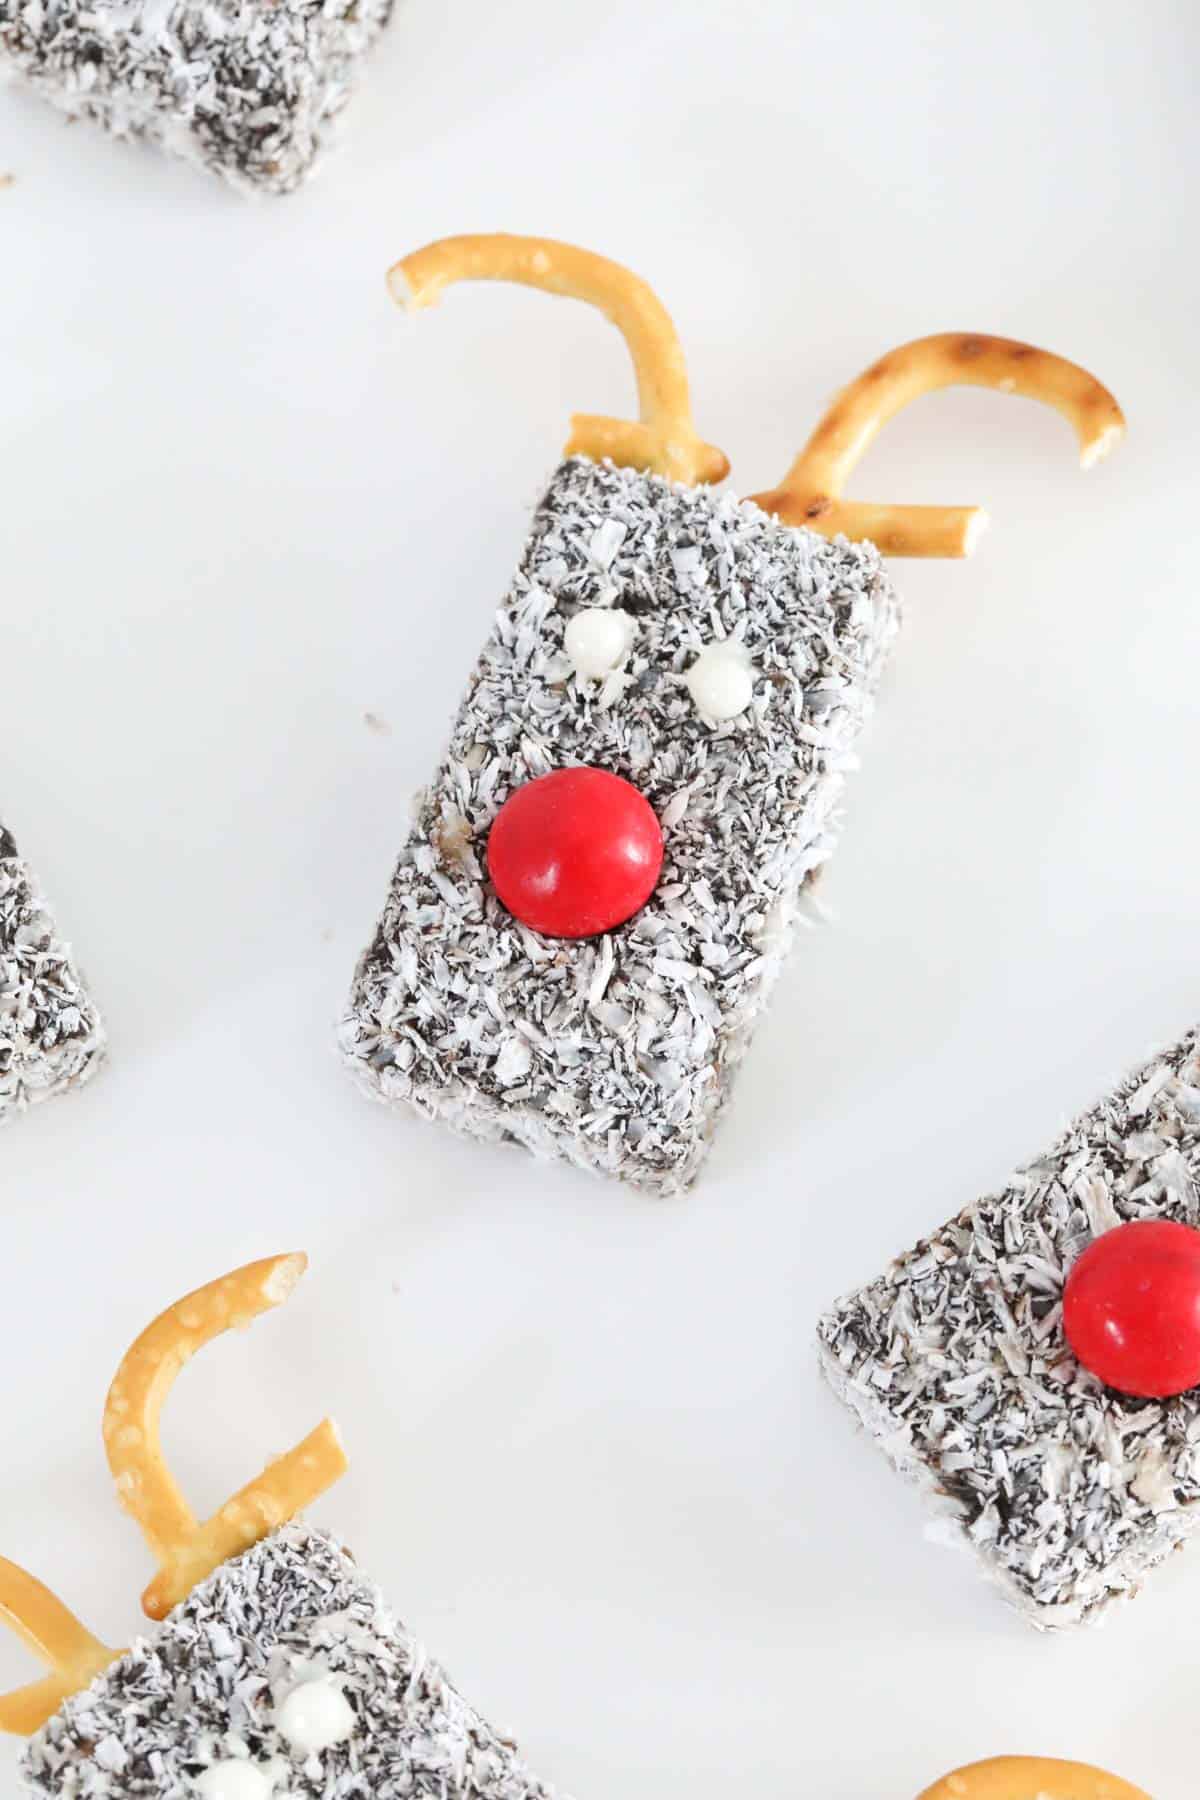 A chocolate coconut lamington finger decorated to look like a reindeer.